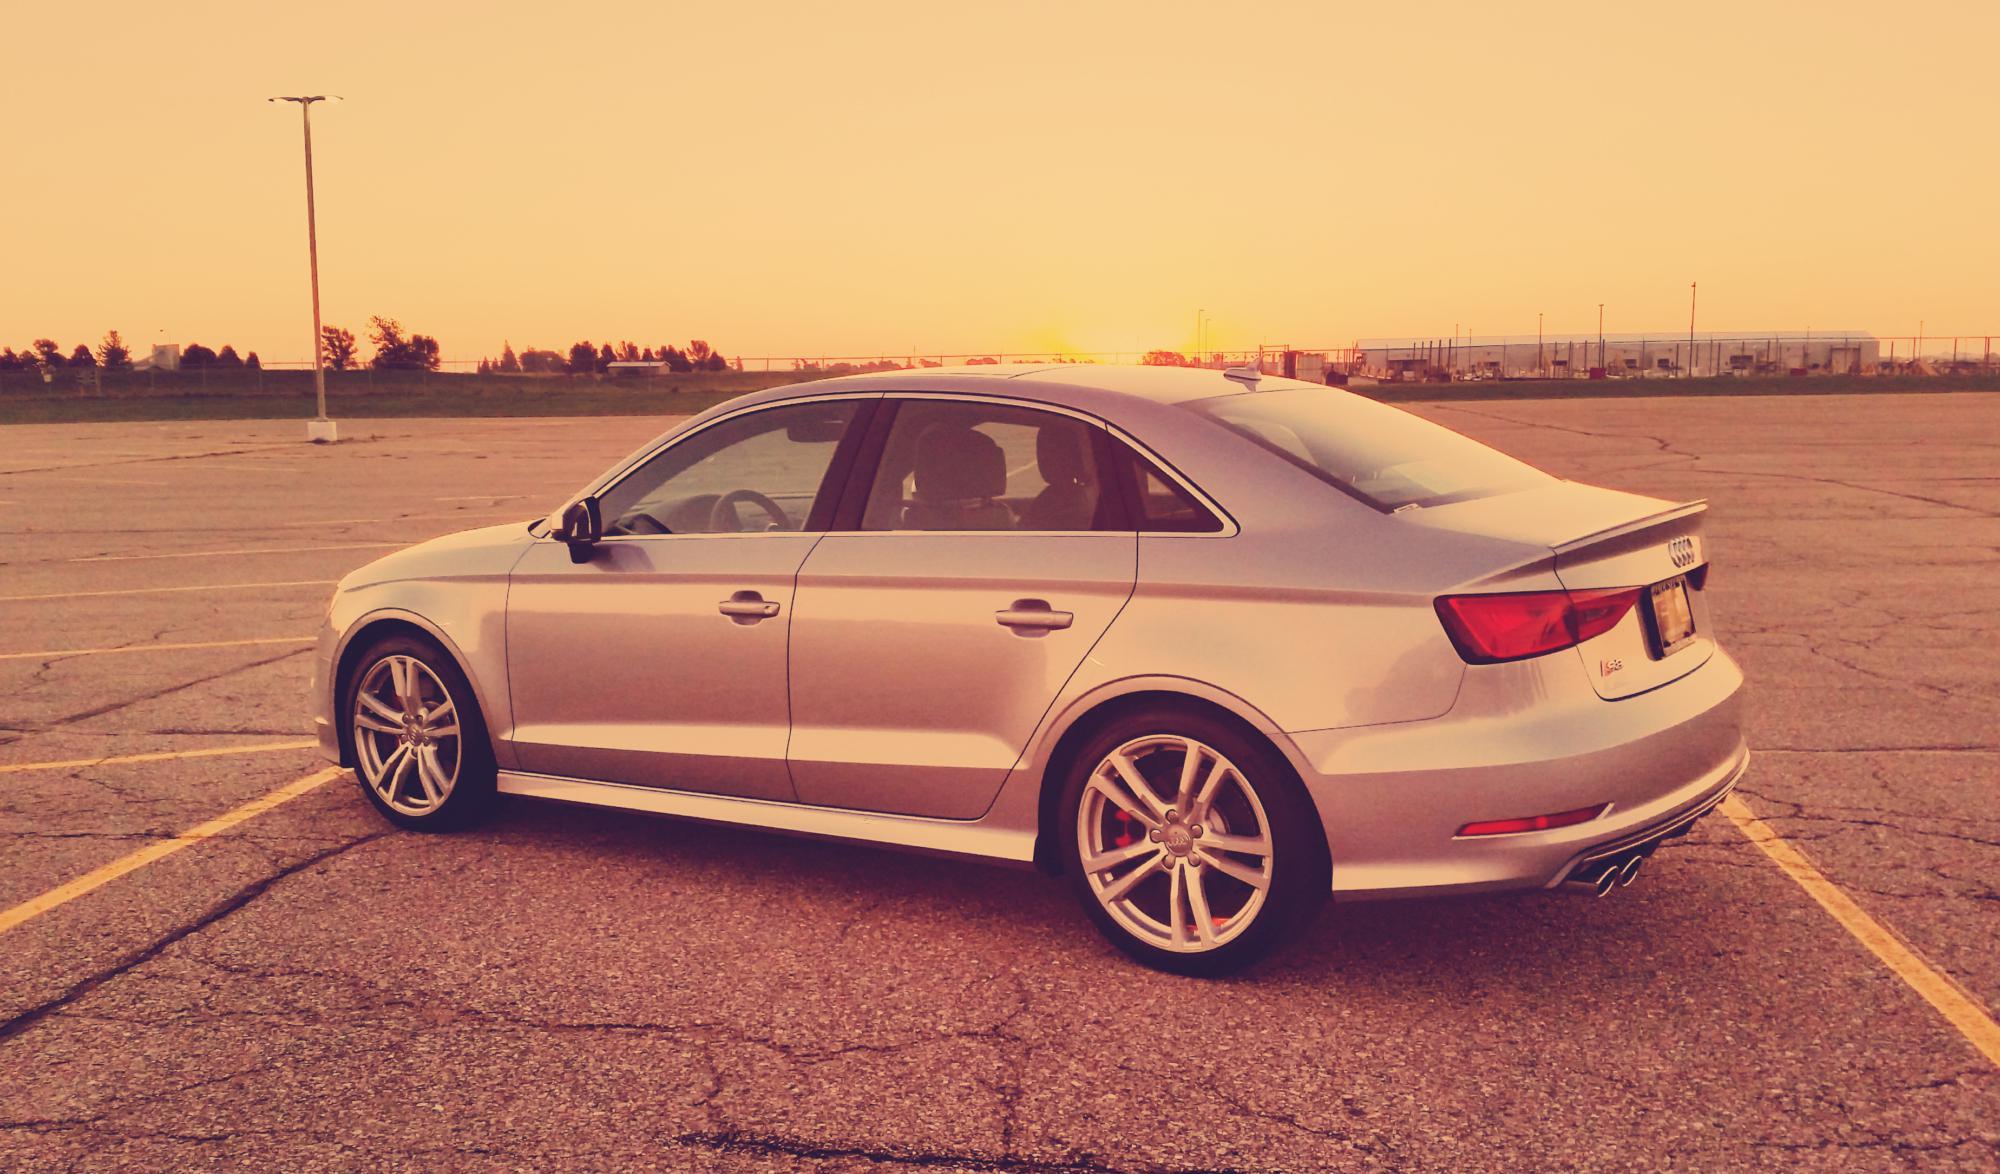 2016 Audi A3 - News, reviews, picture galleries and videos - The Car Guide